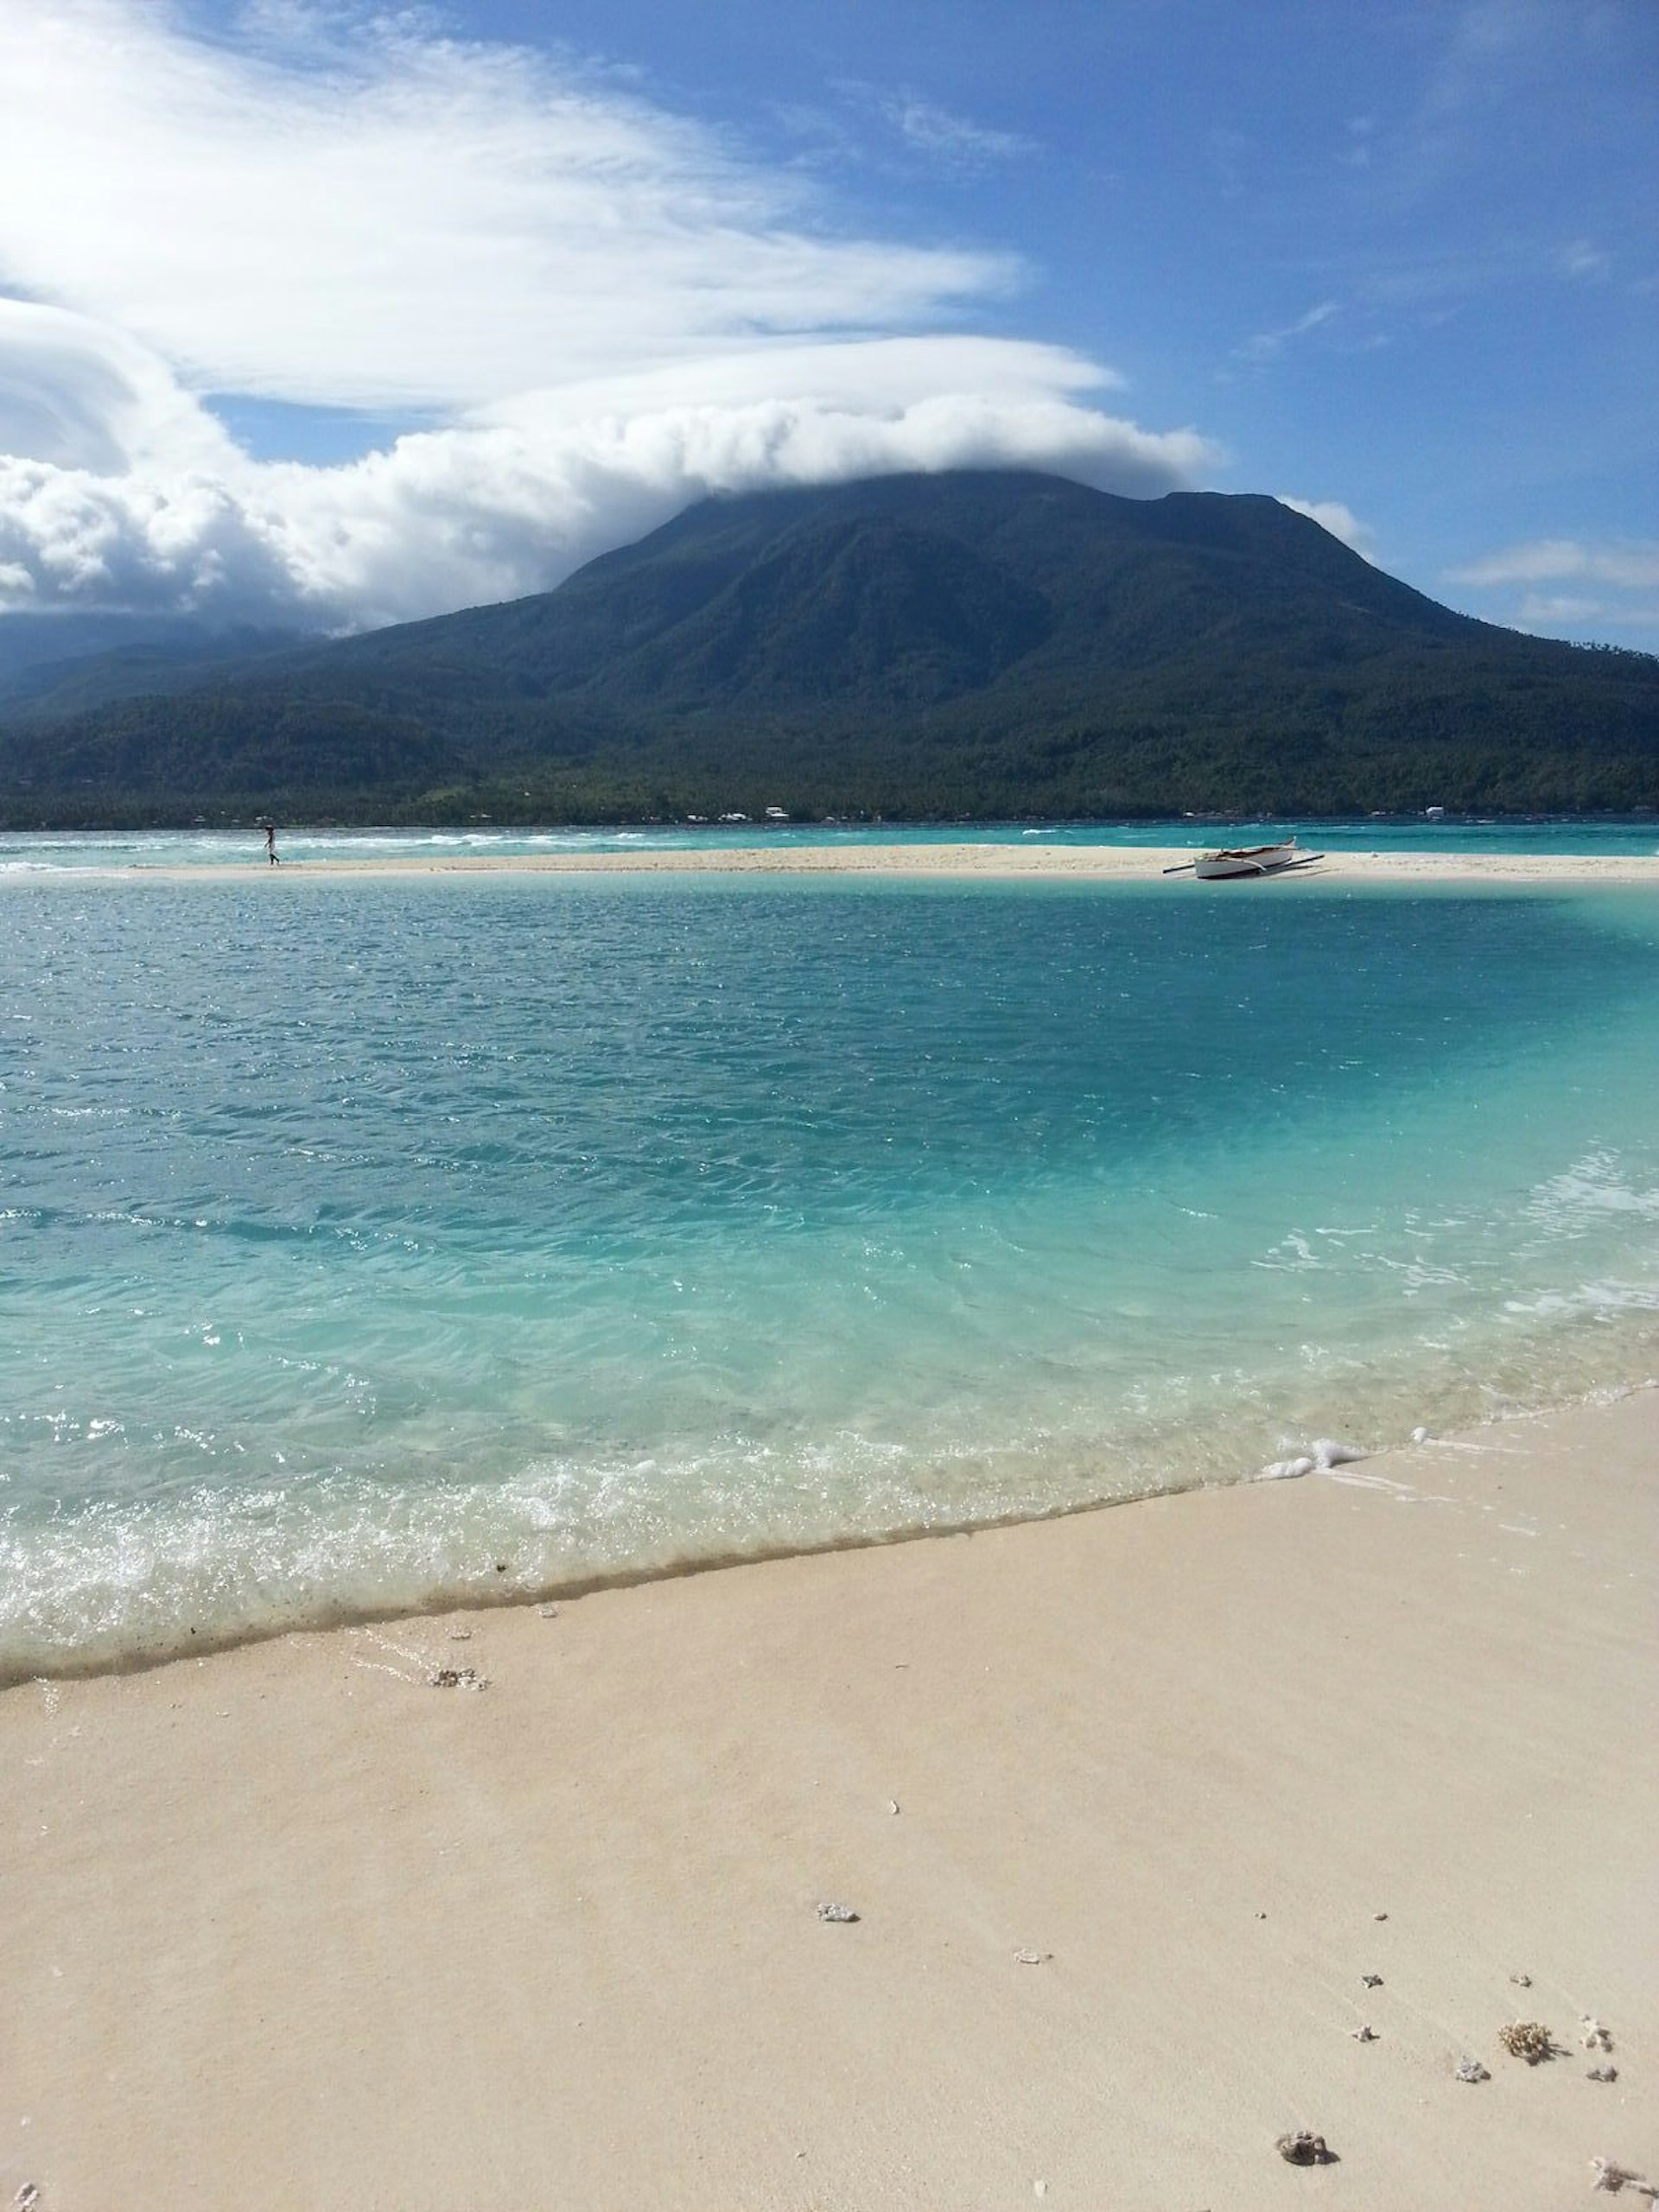 The imposing silhouette of Camiguin, topped with snow-white clouds, viewed from White Island. The land is seperated by a stretch of sparkling, turquoise water